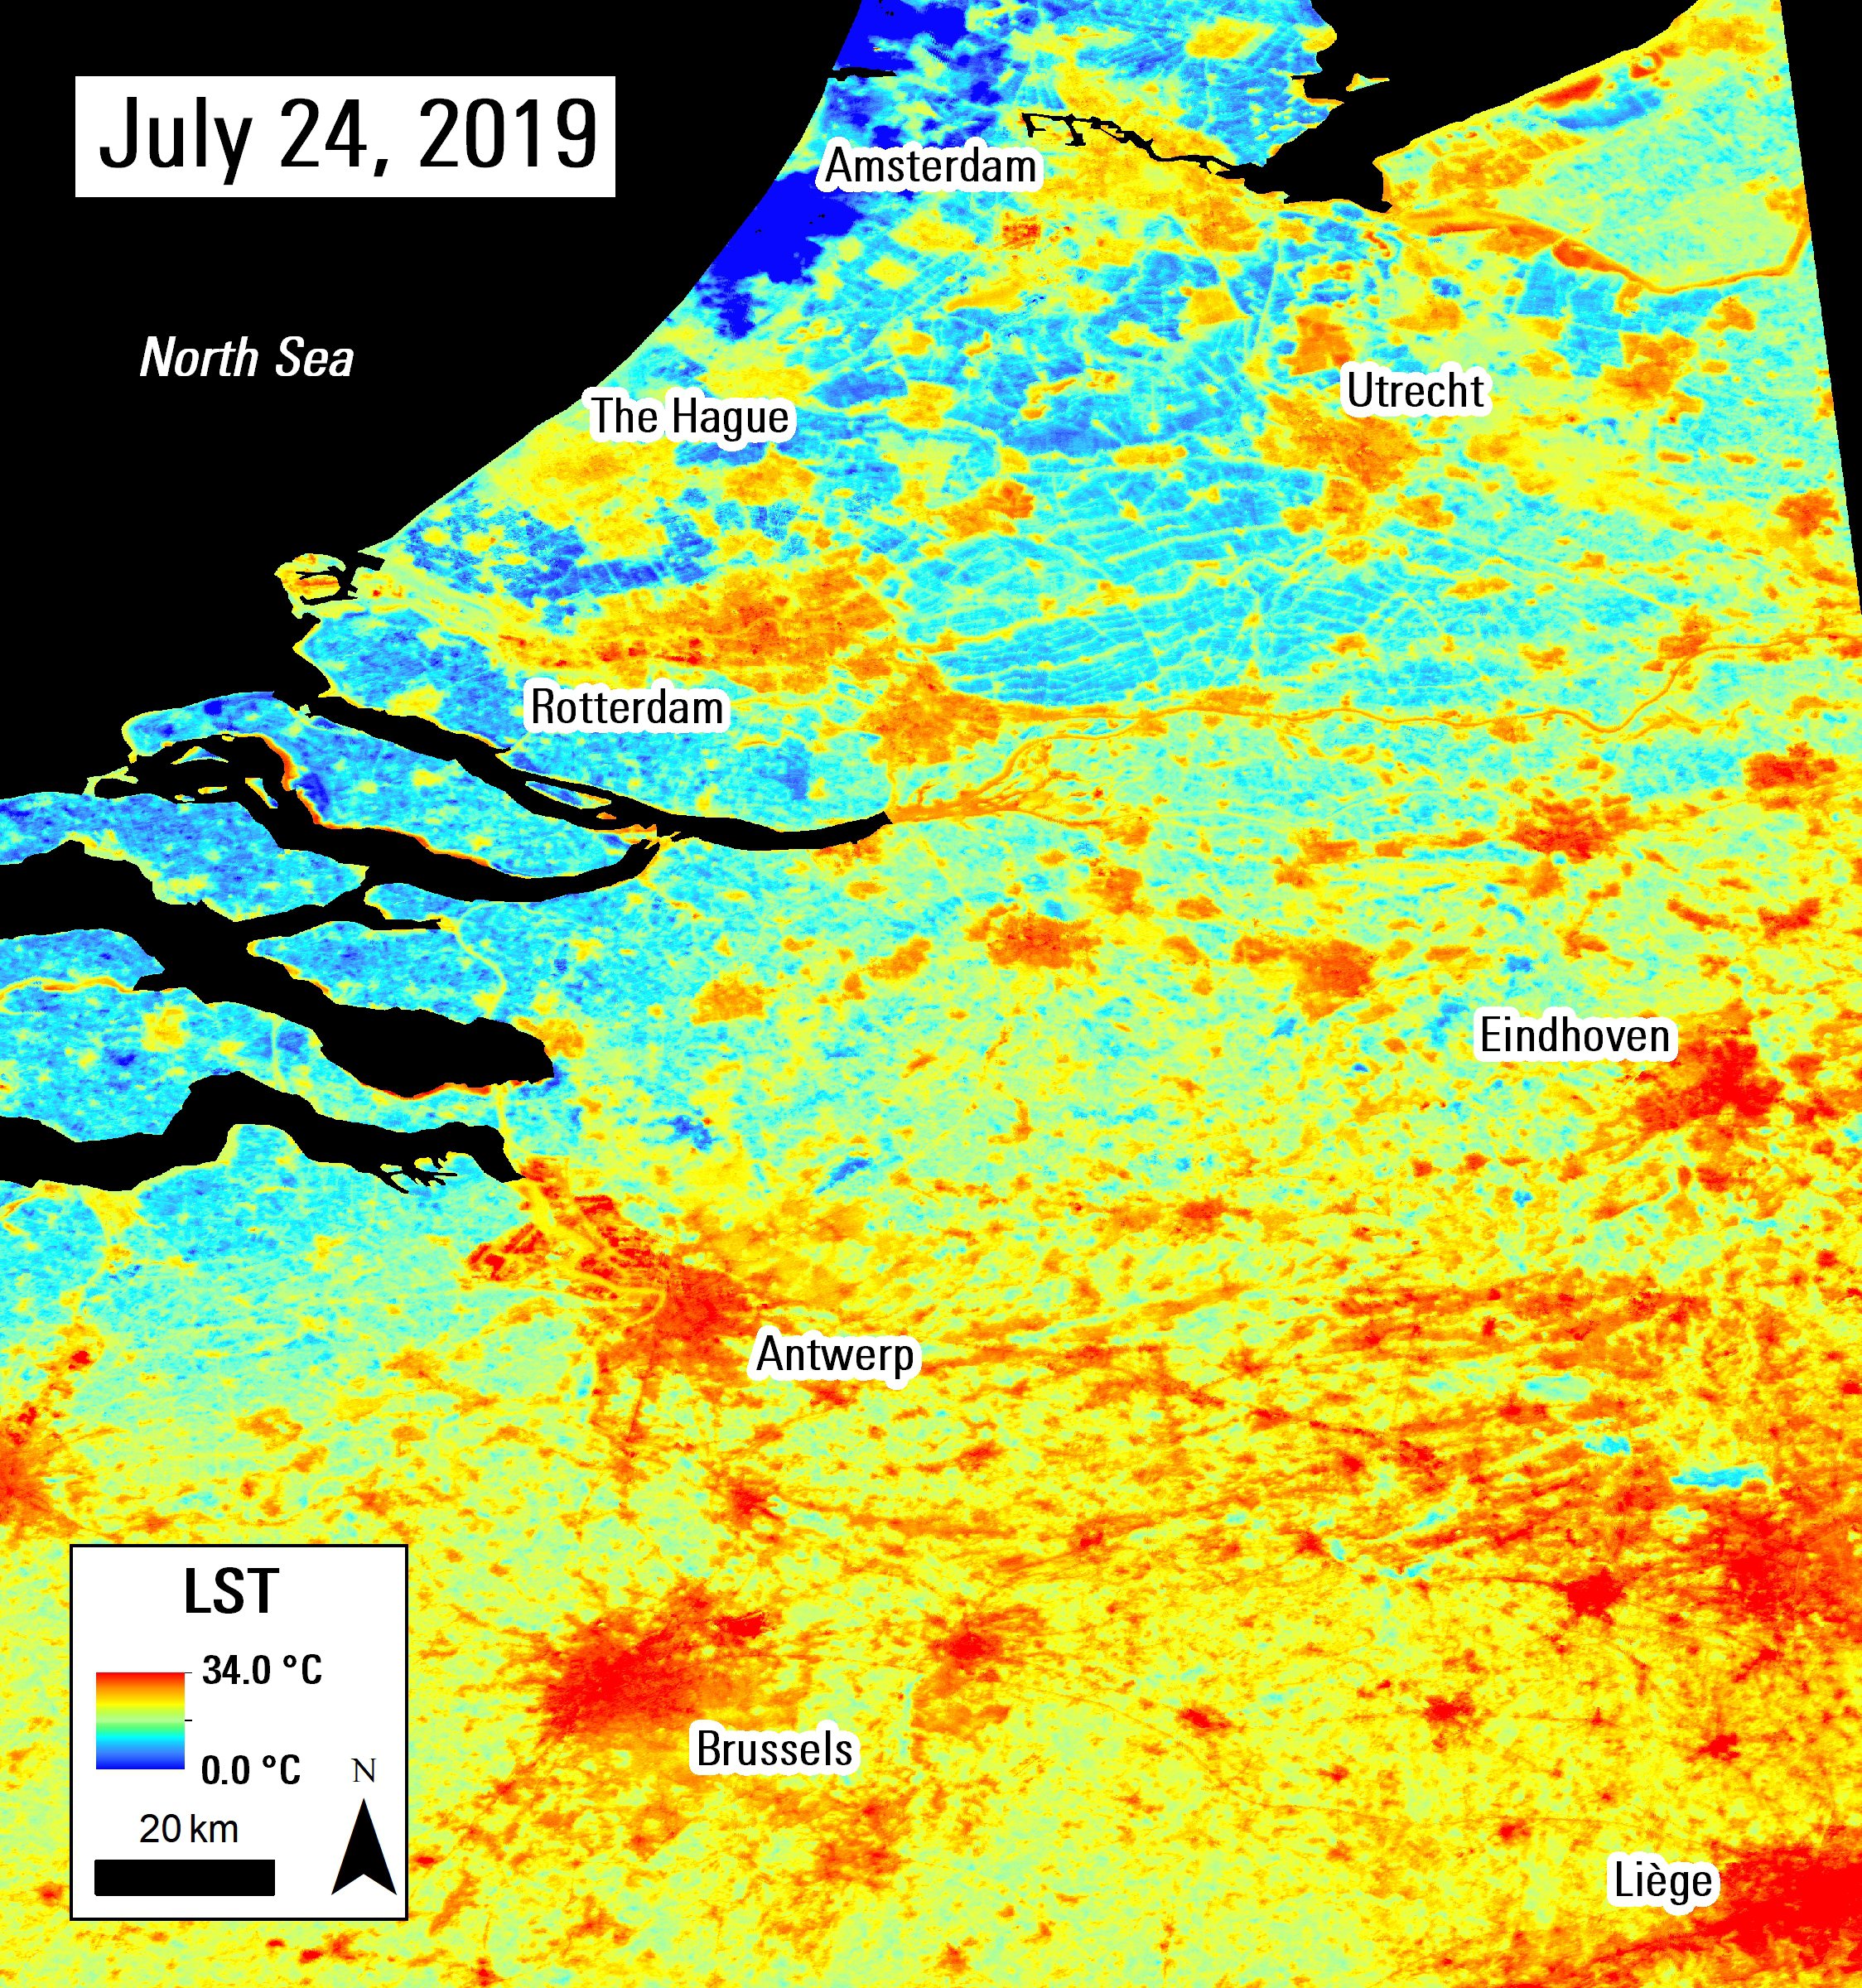 ECOSTRESS Land Surface Temperature observation over cities in Belgium and the Netherlands taken on July 24, 2019.